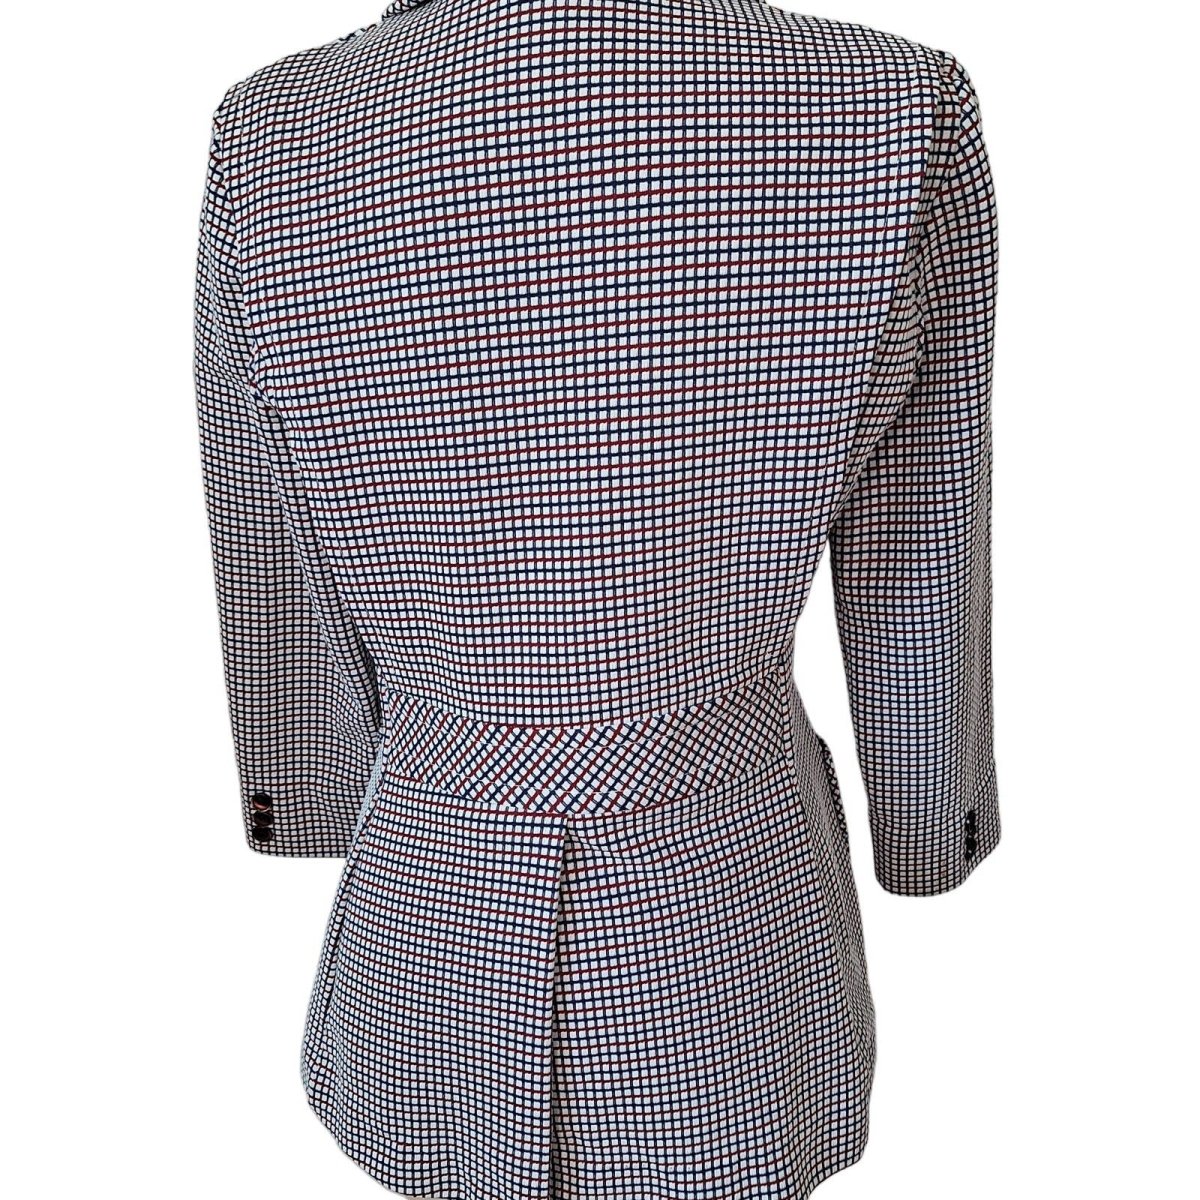 60s/70s That Girl Micro Check Jacket Size: M/L Bust/Chest 38-40 - themallvintage The Mall Vintage